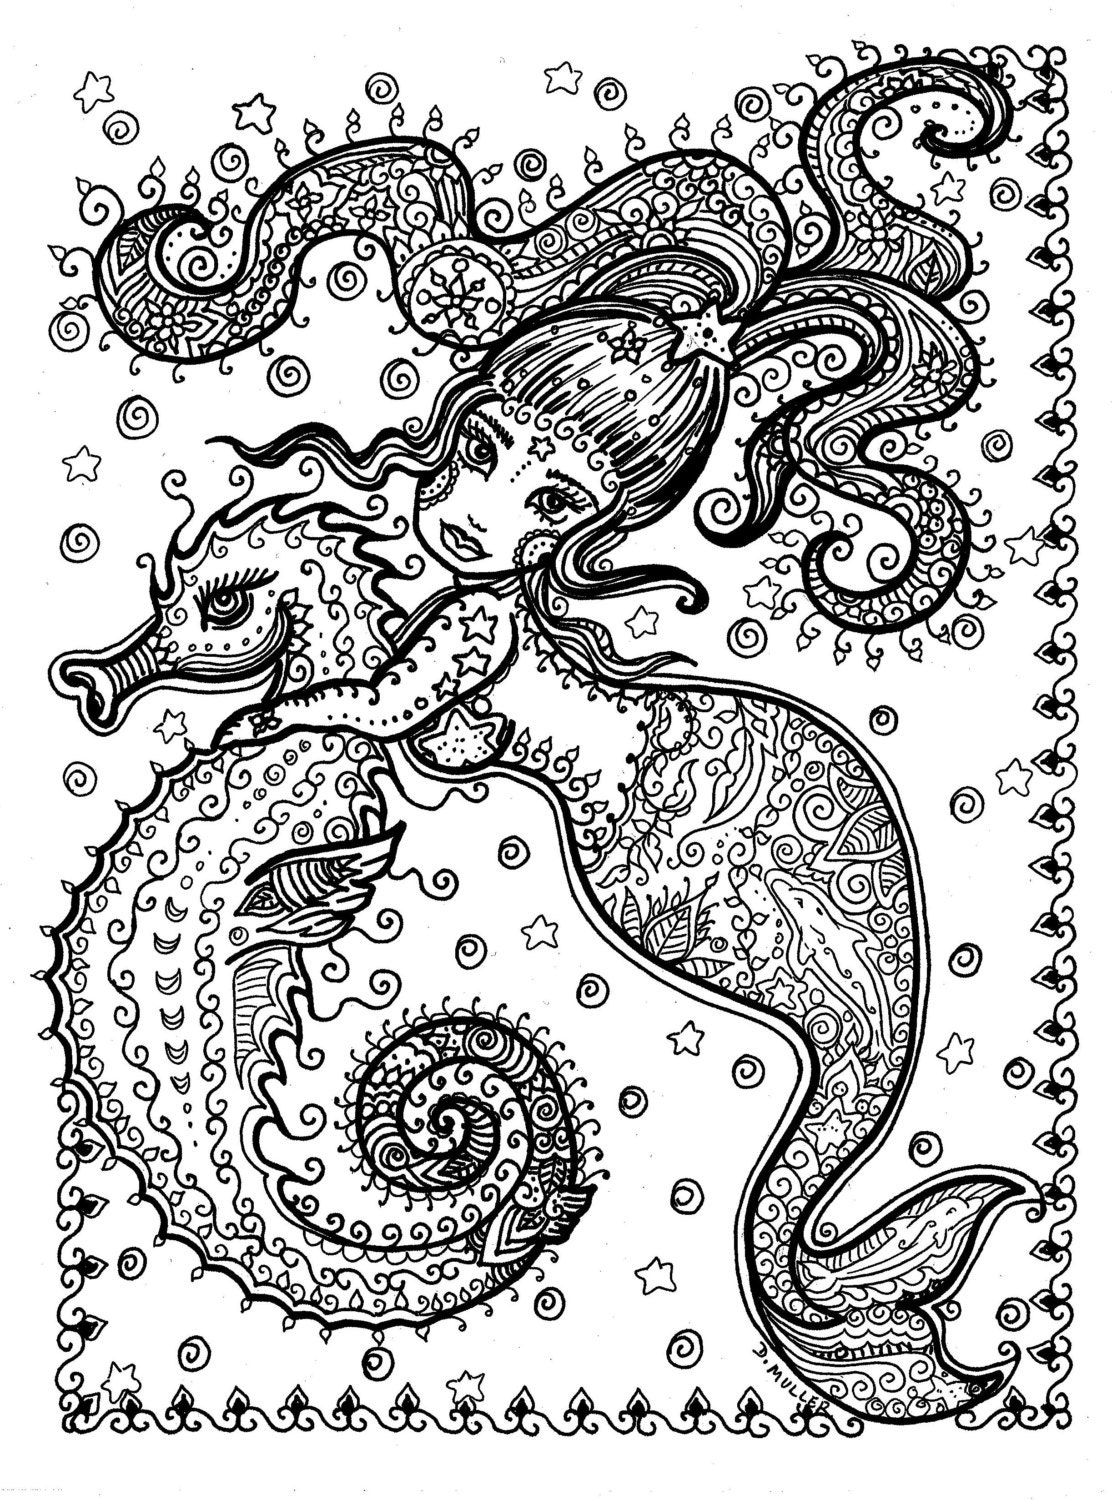 Download Printable Coloring Page Sea Horse and Mermaid You download and